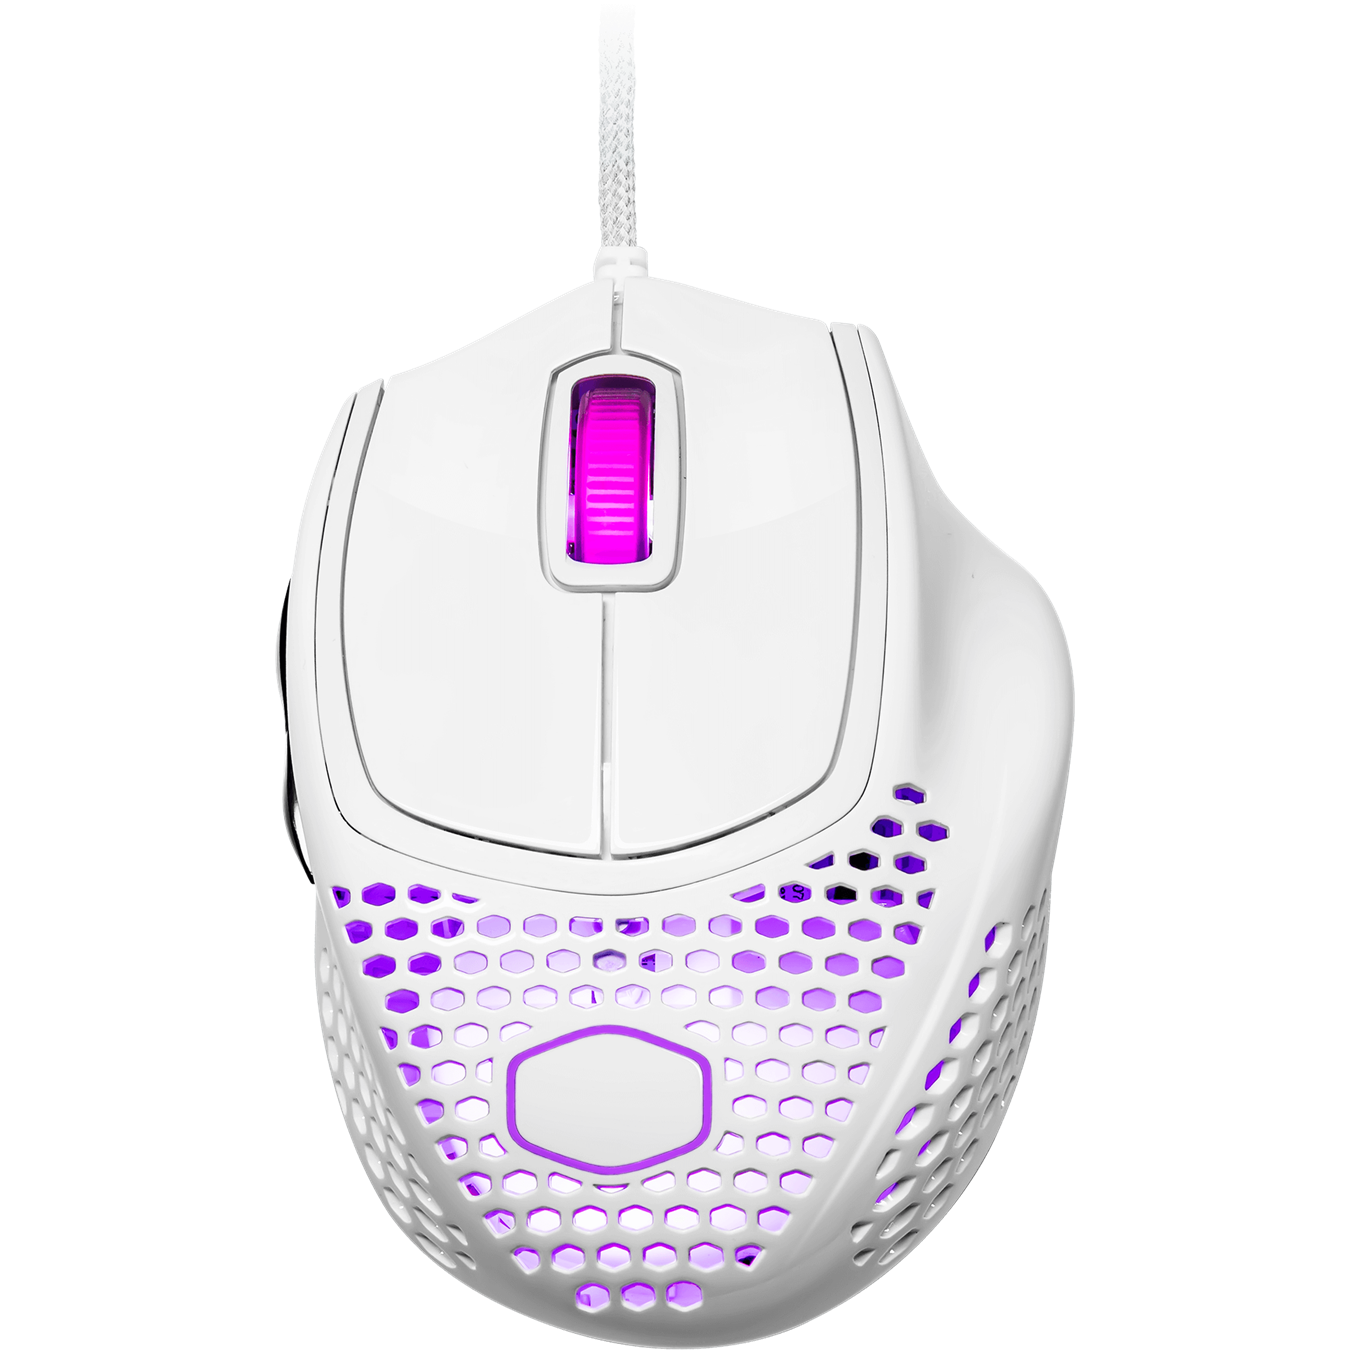 MM720 RGB Gaming Mouse - Glossy White